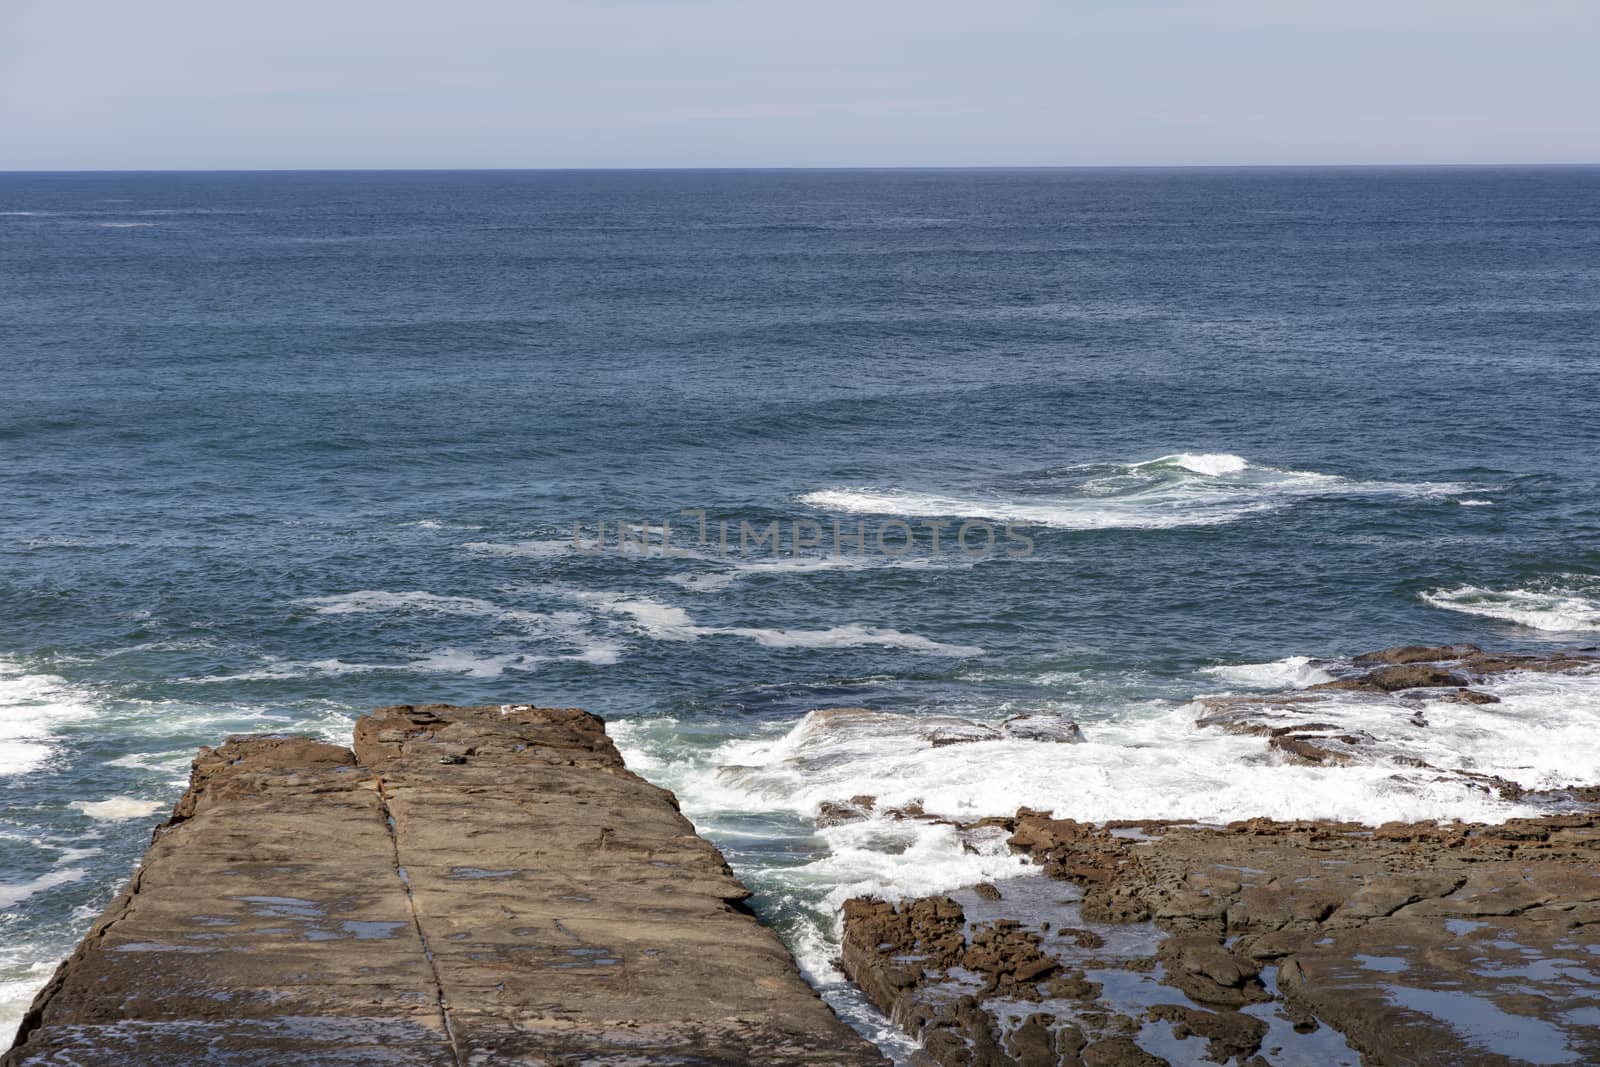 A view of the South Pacific Ocean from Norah Head on the central coast in regional New South Wales in Australia